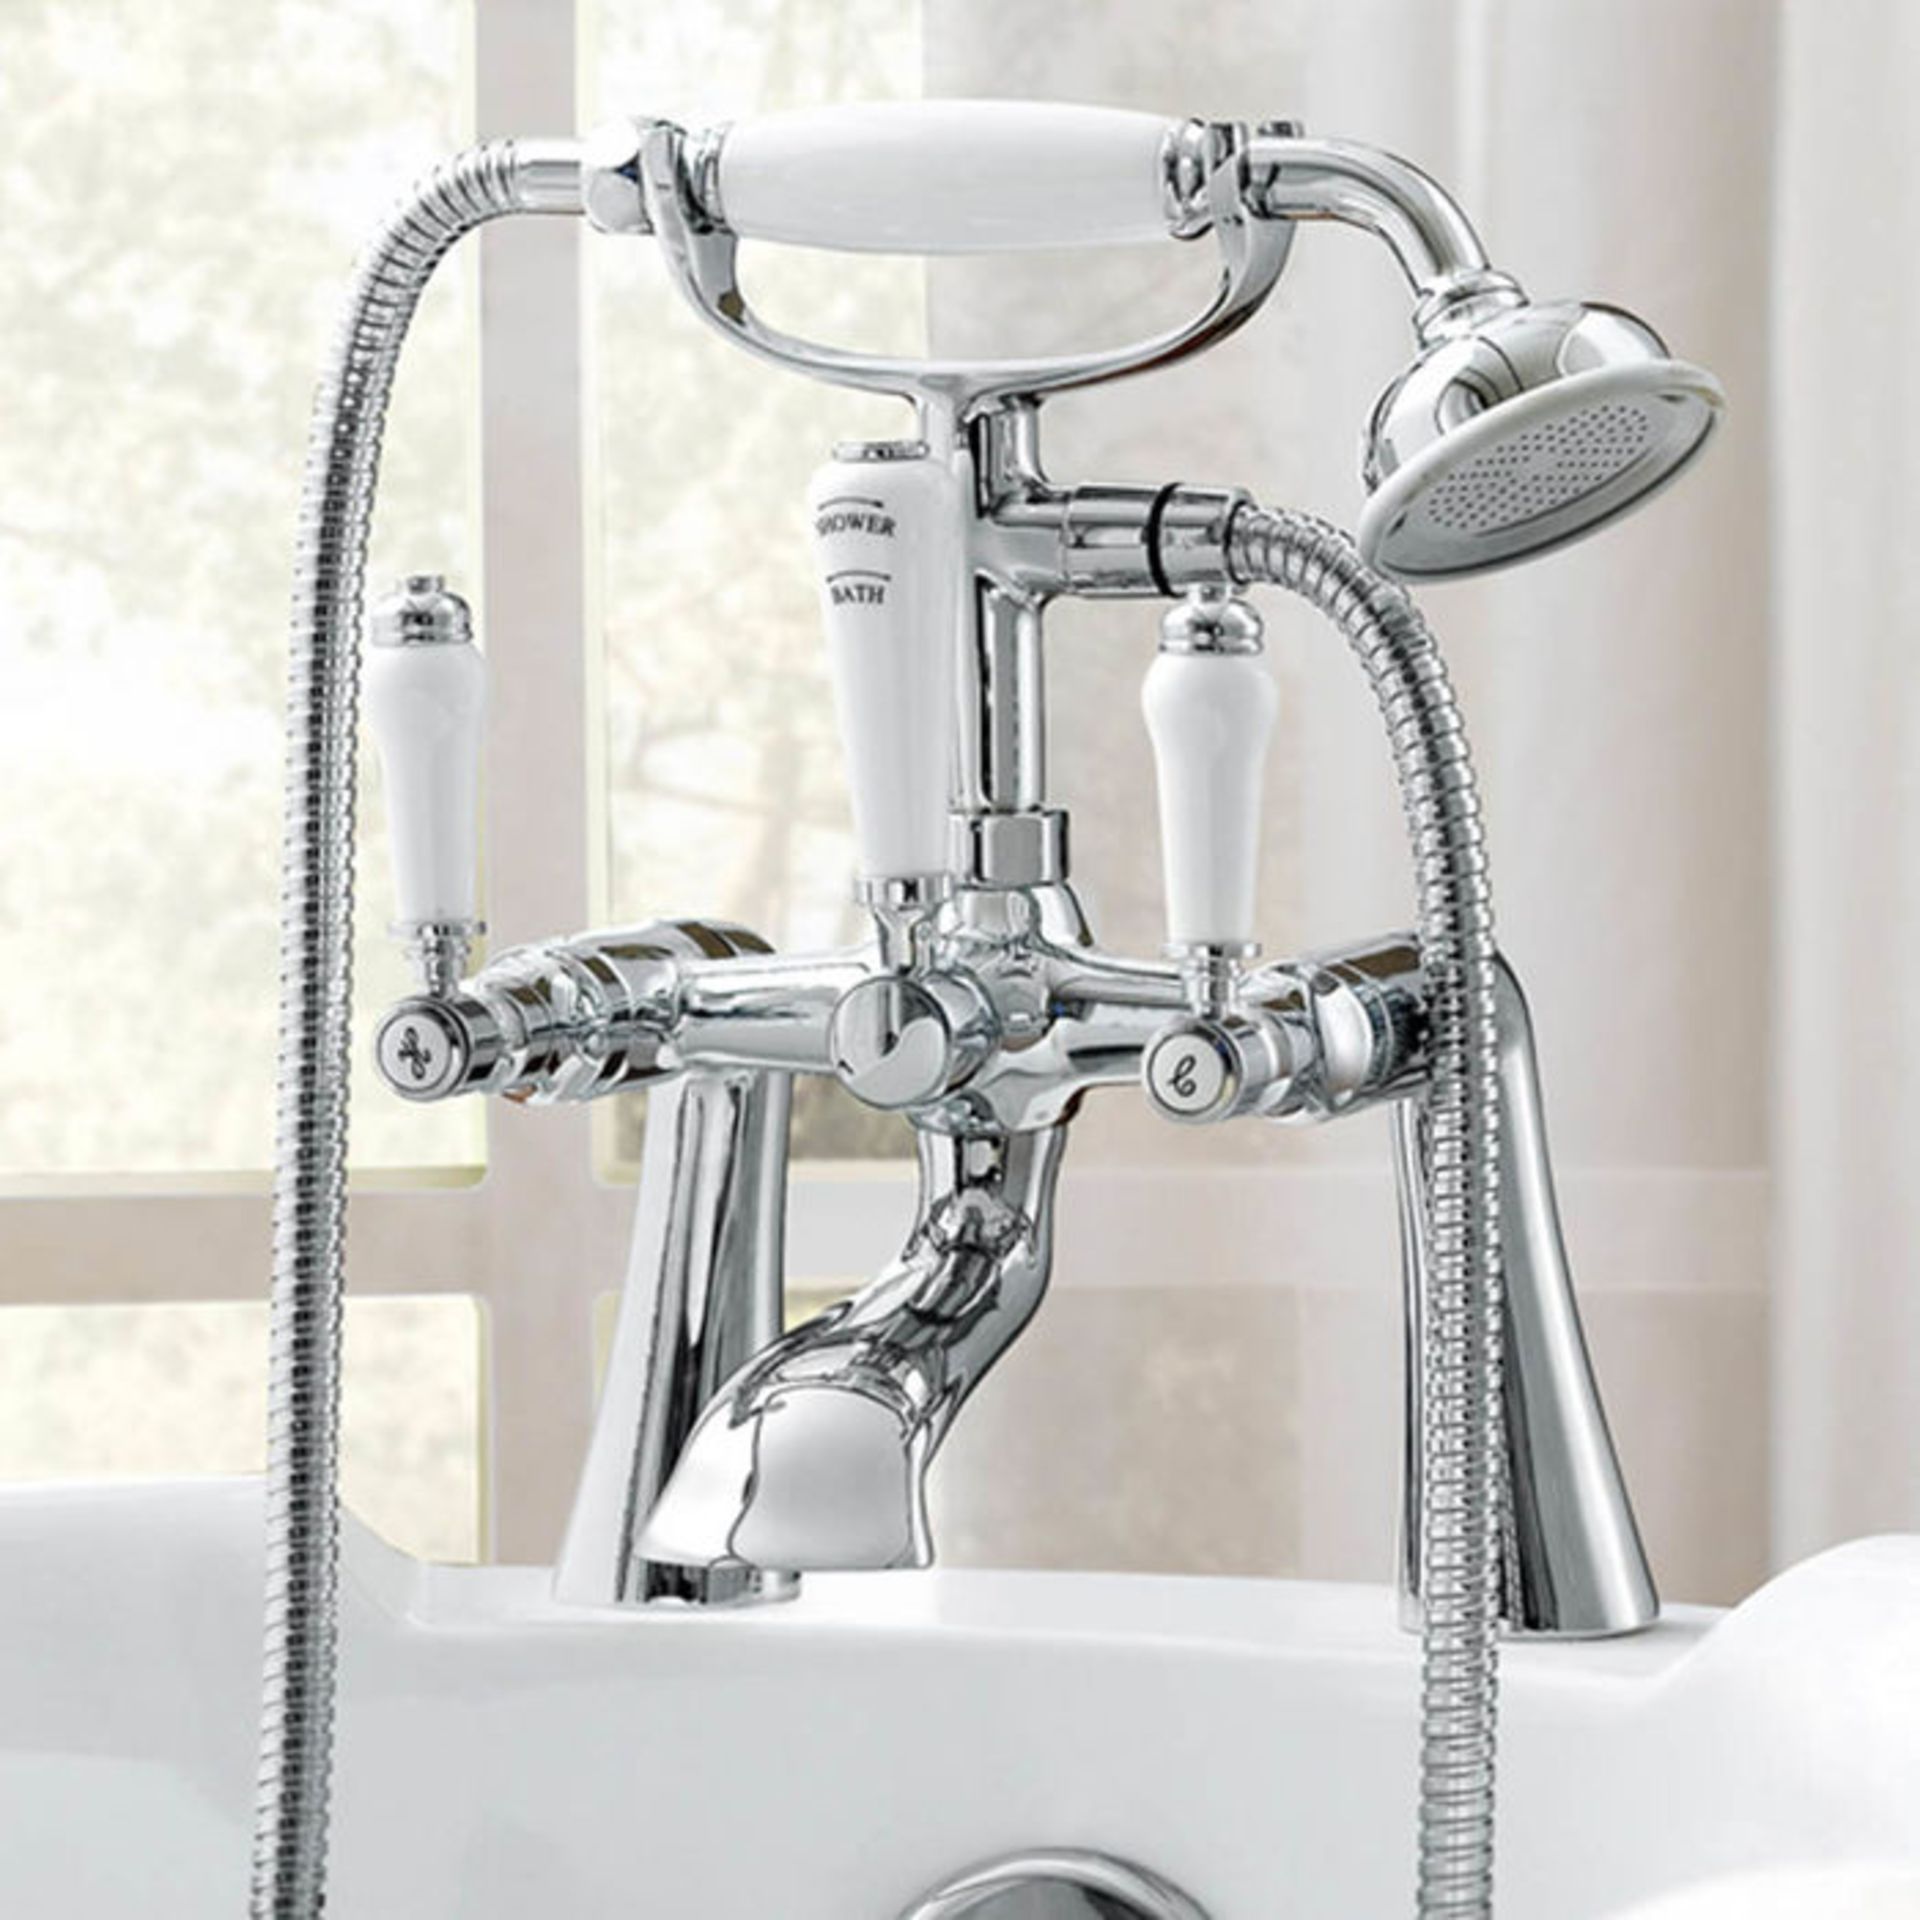 (NF107) Regal Chrome Traditional Bath Mixer Lever Tap with Handheld Shower Chrome Plated Solid Brass